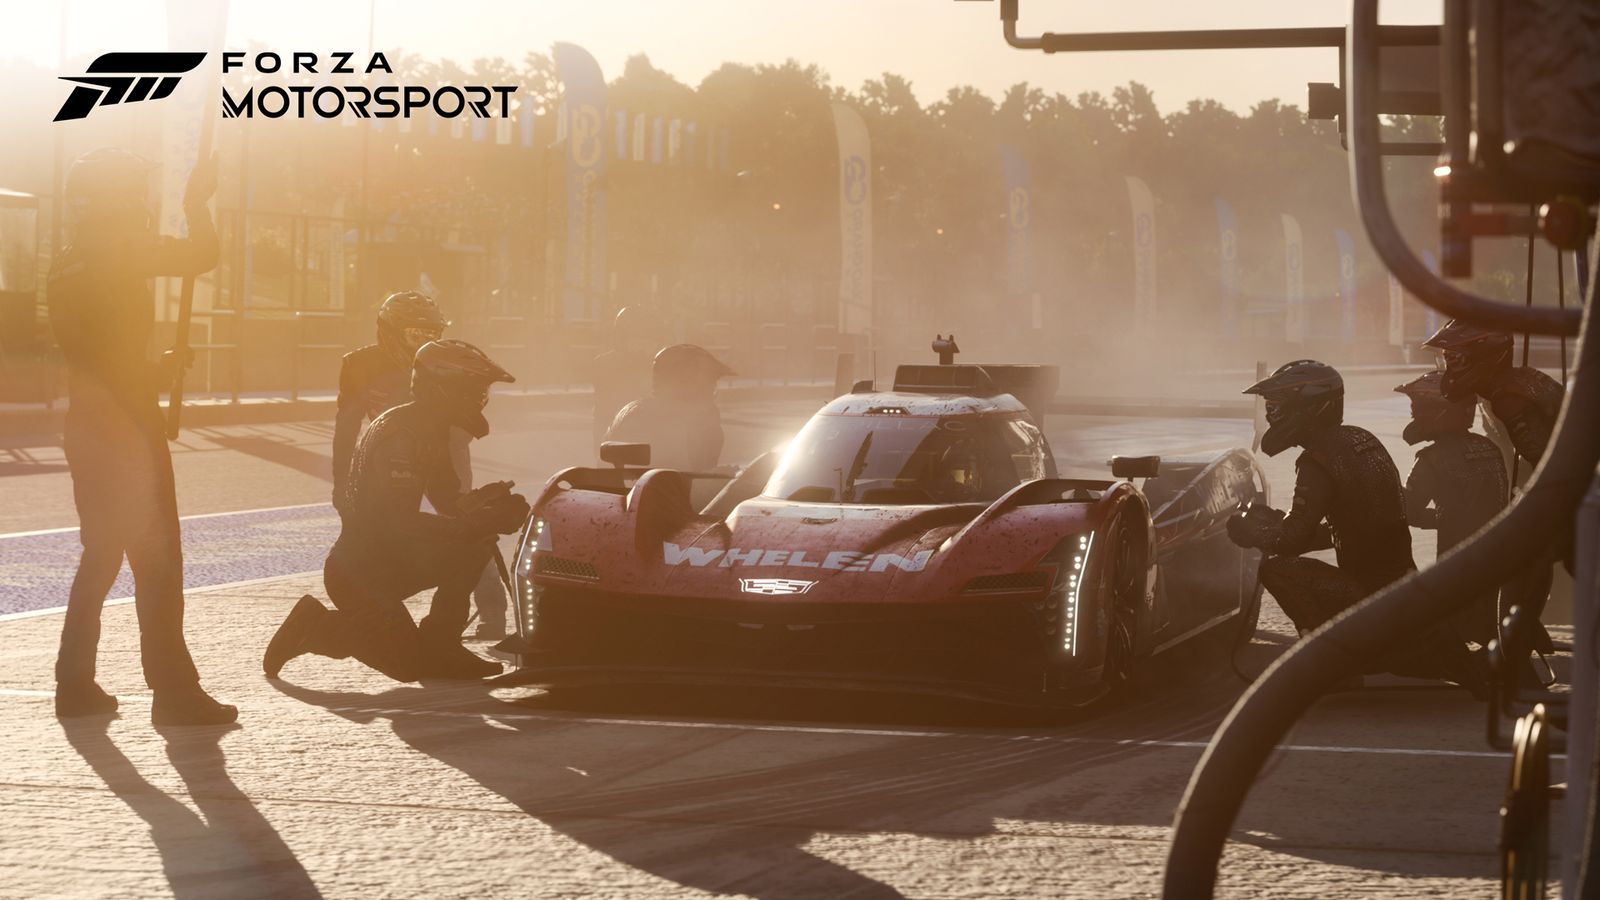 Forza Motorsport Update 1.0 patch notes